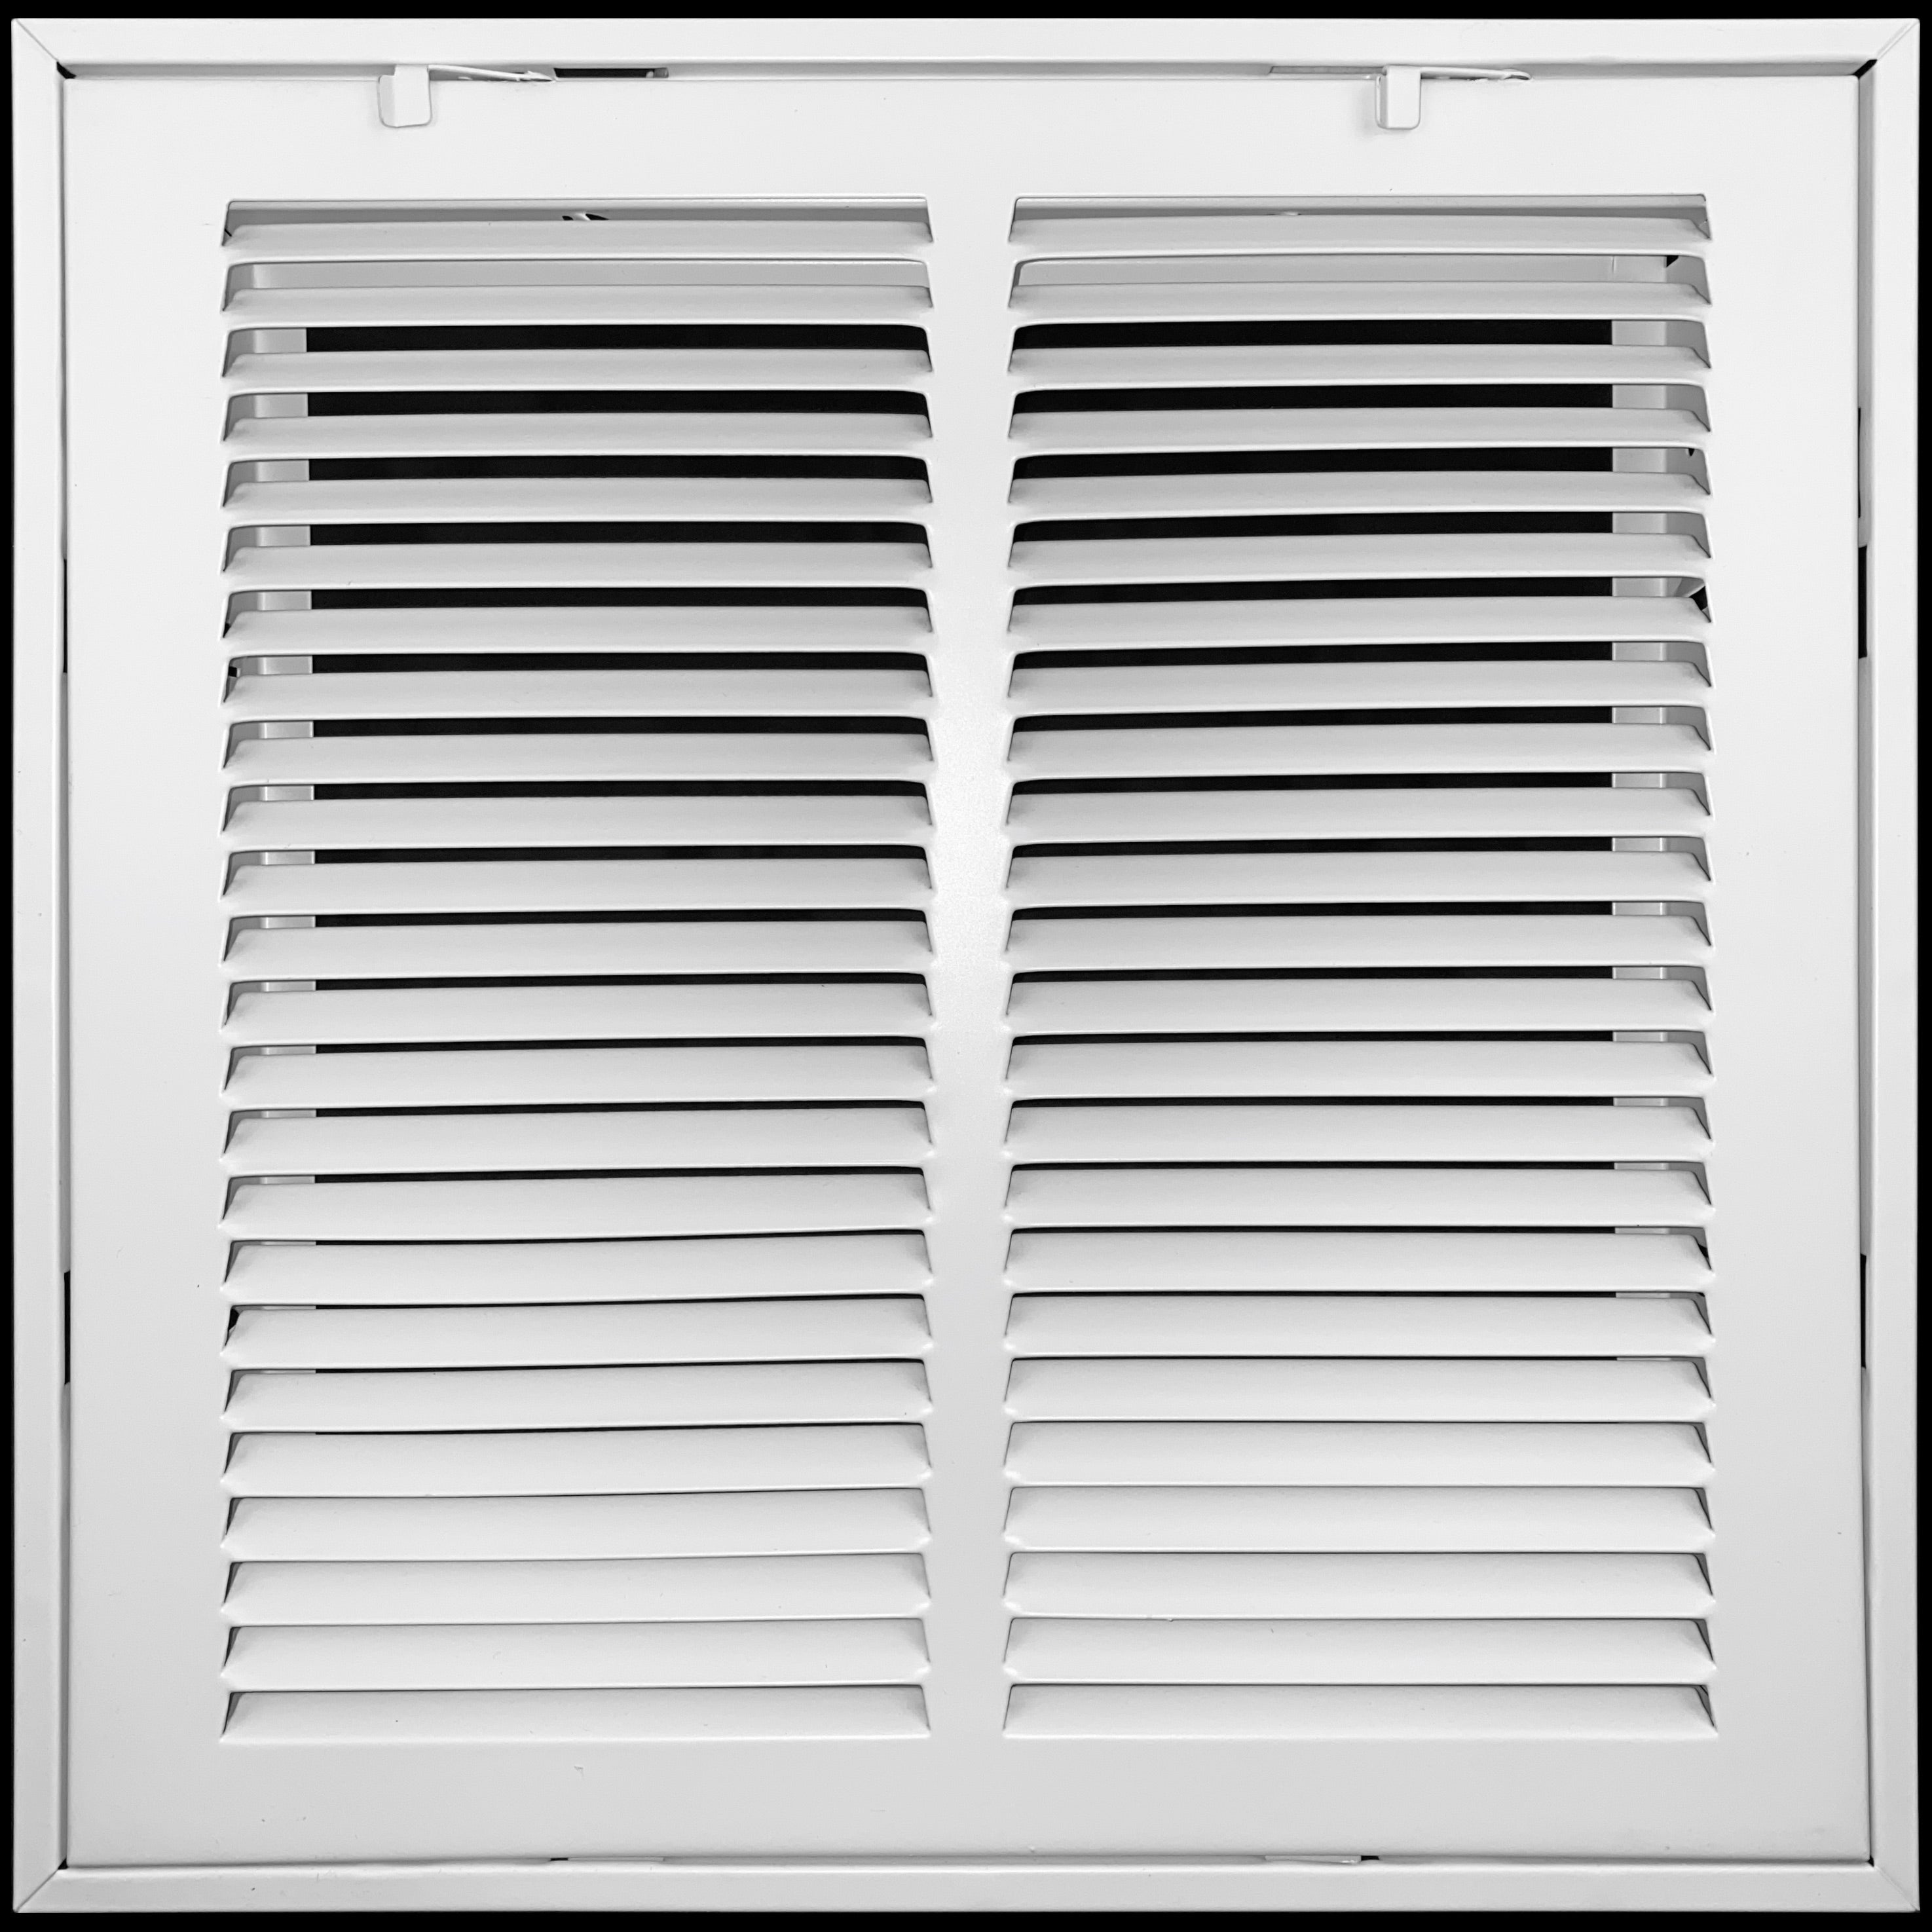 airgrilles 14" x 14" duct opening  -  steel return air filter grille for sidewall and ceiling hnd-rafg1-wh-14x14 b081fd35zn - 1